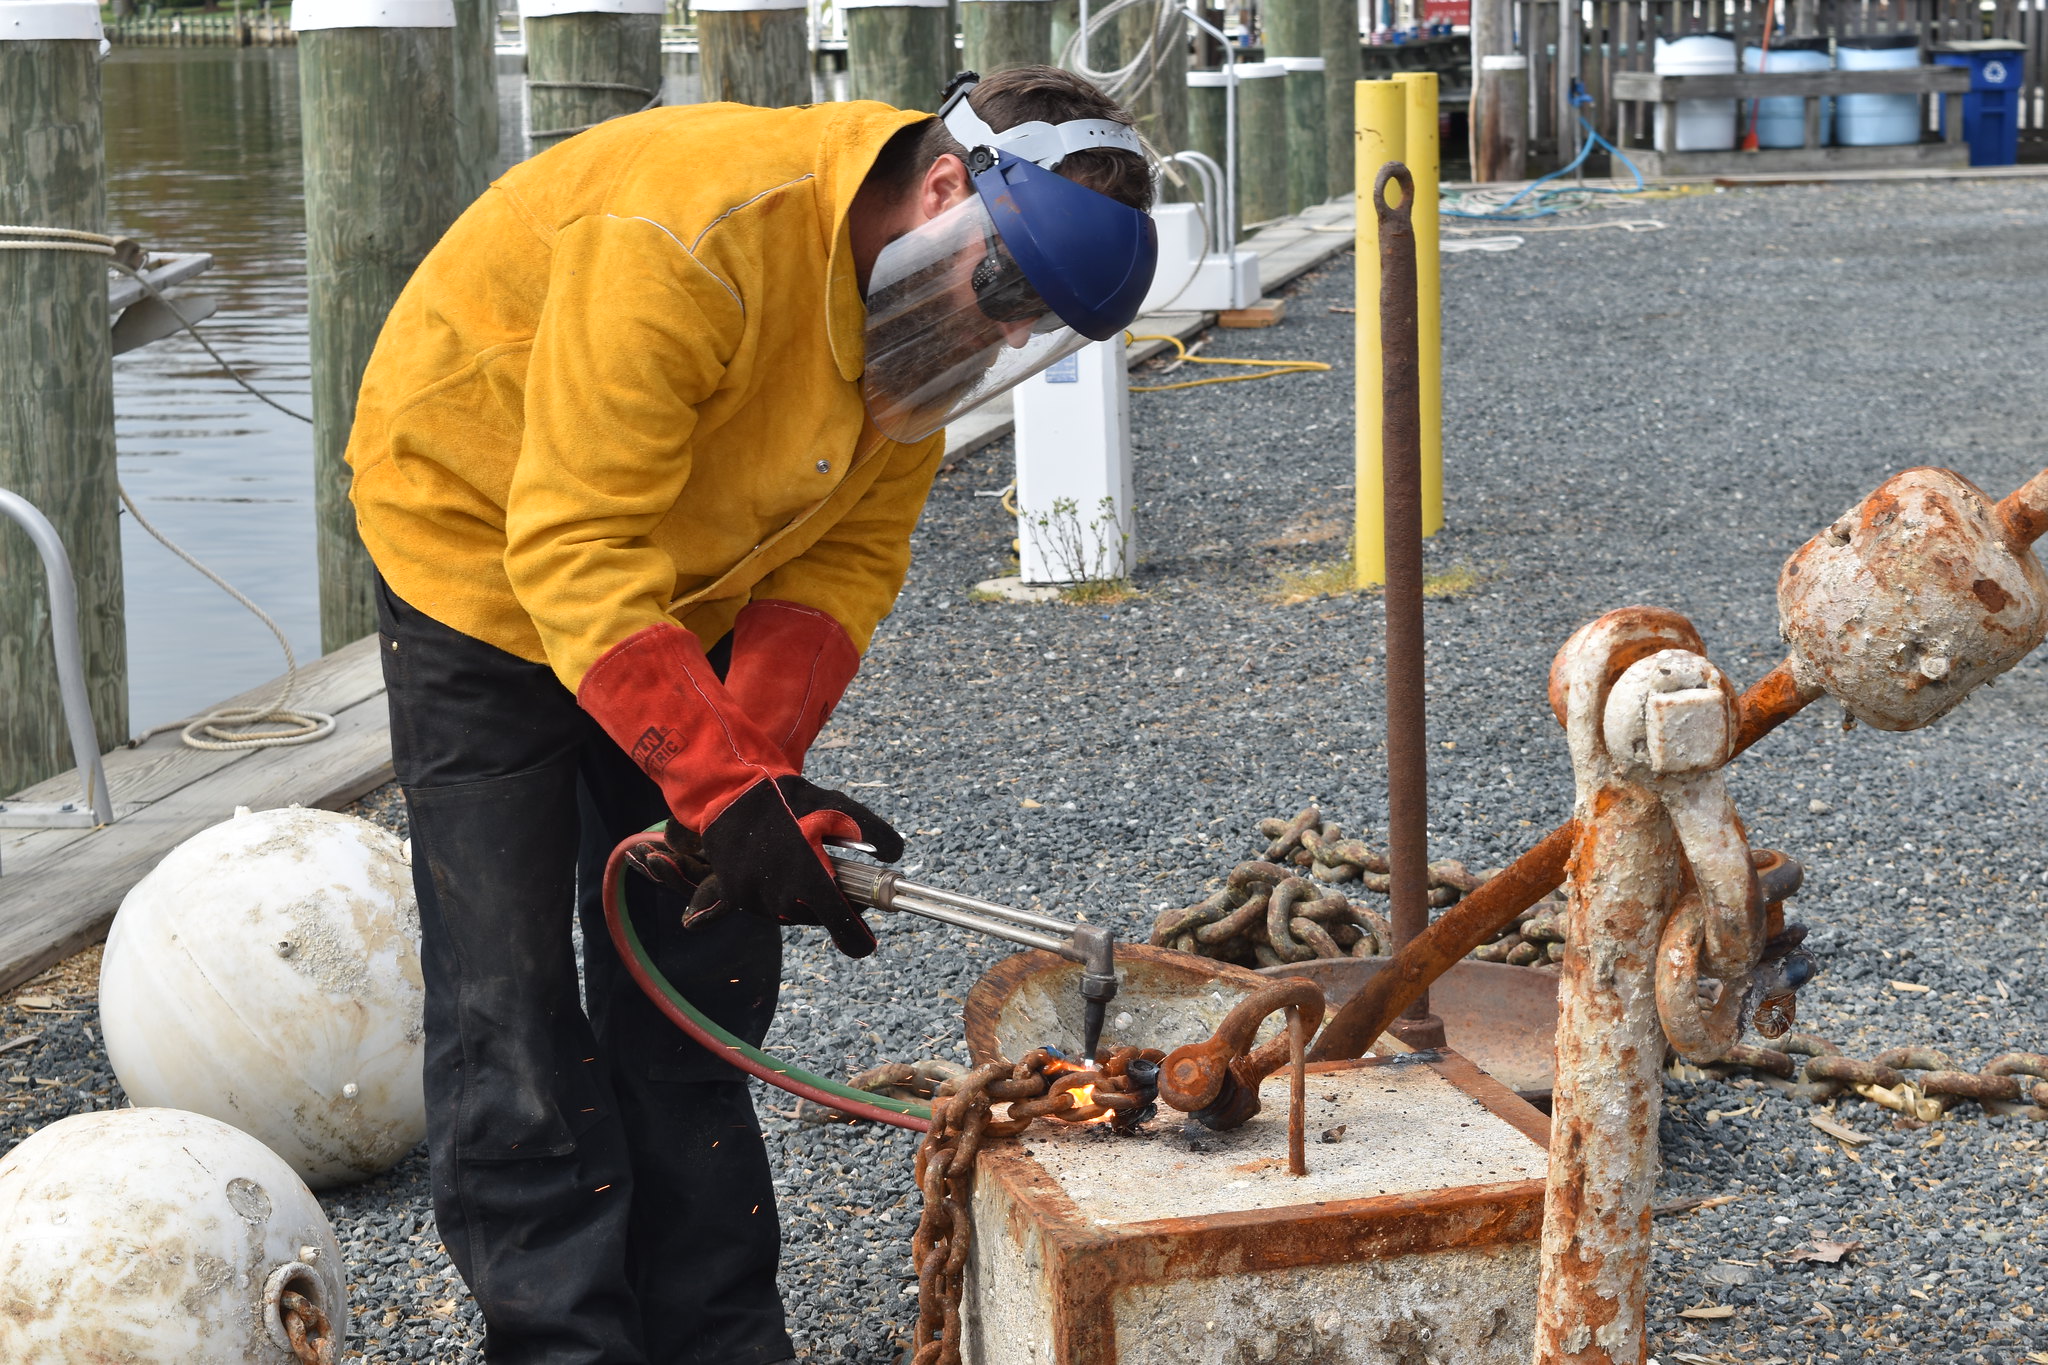 The Chesapeake Bay Maritime Museum and Chesapeake College are partnering to offer an introduction to marine welding on March 22-24.